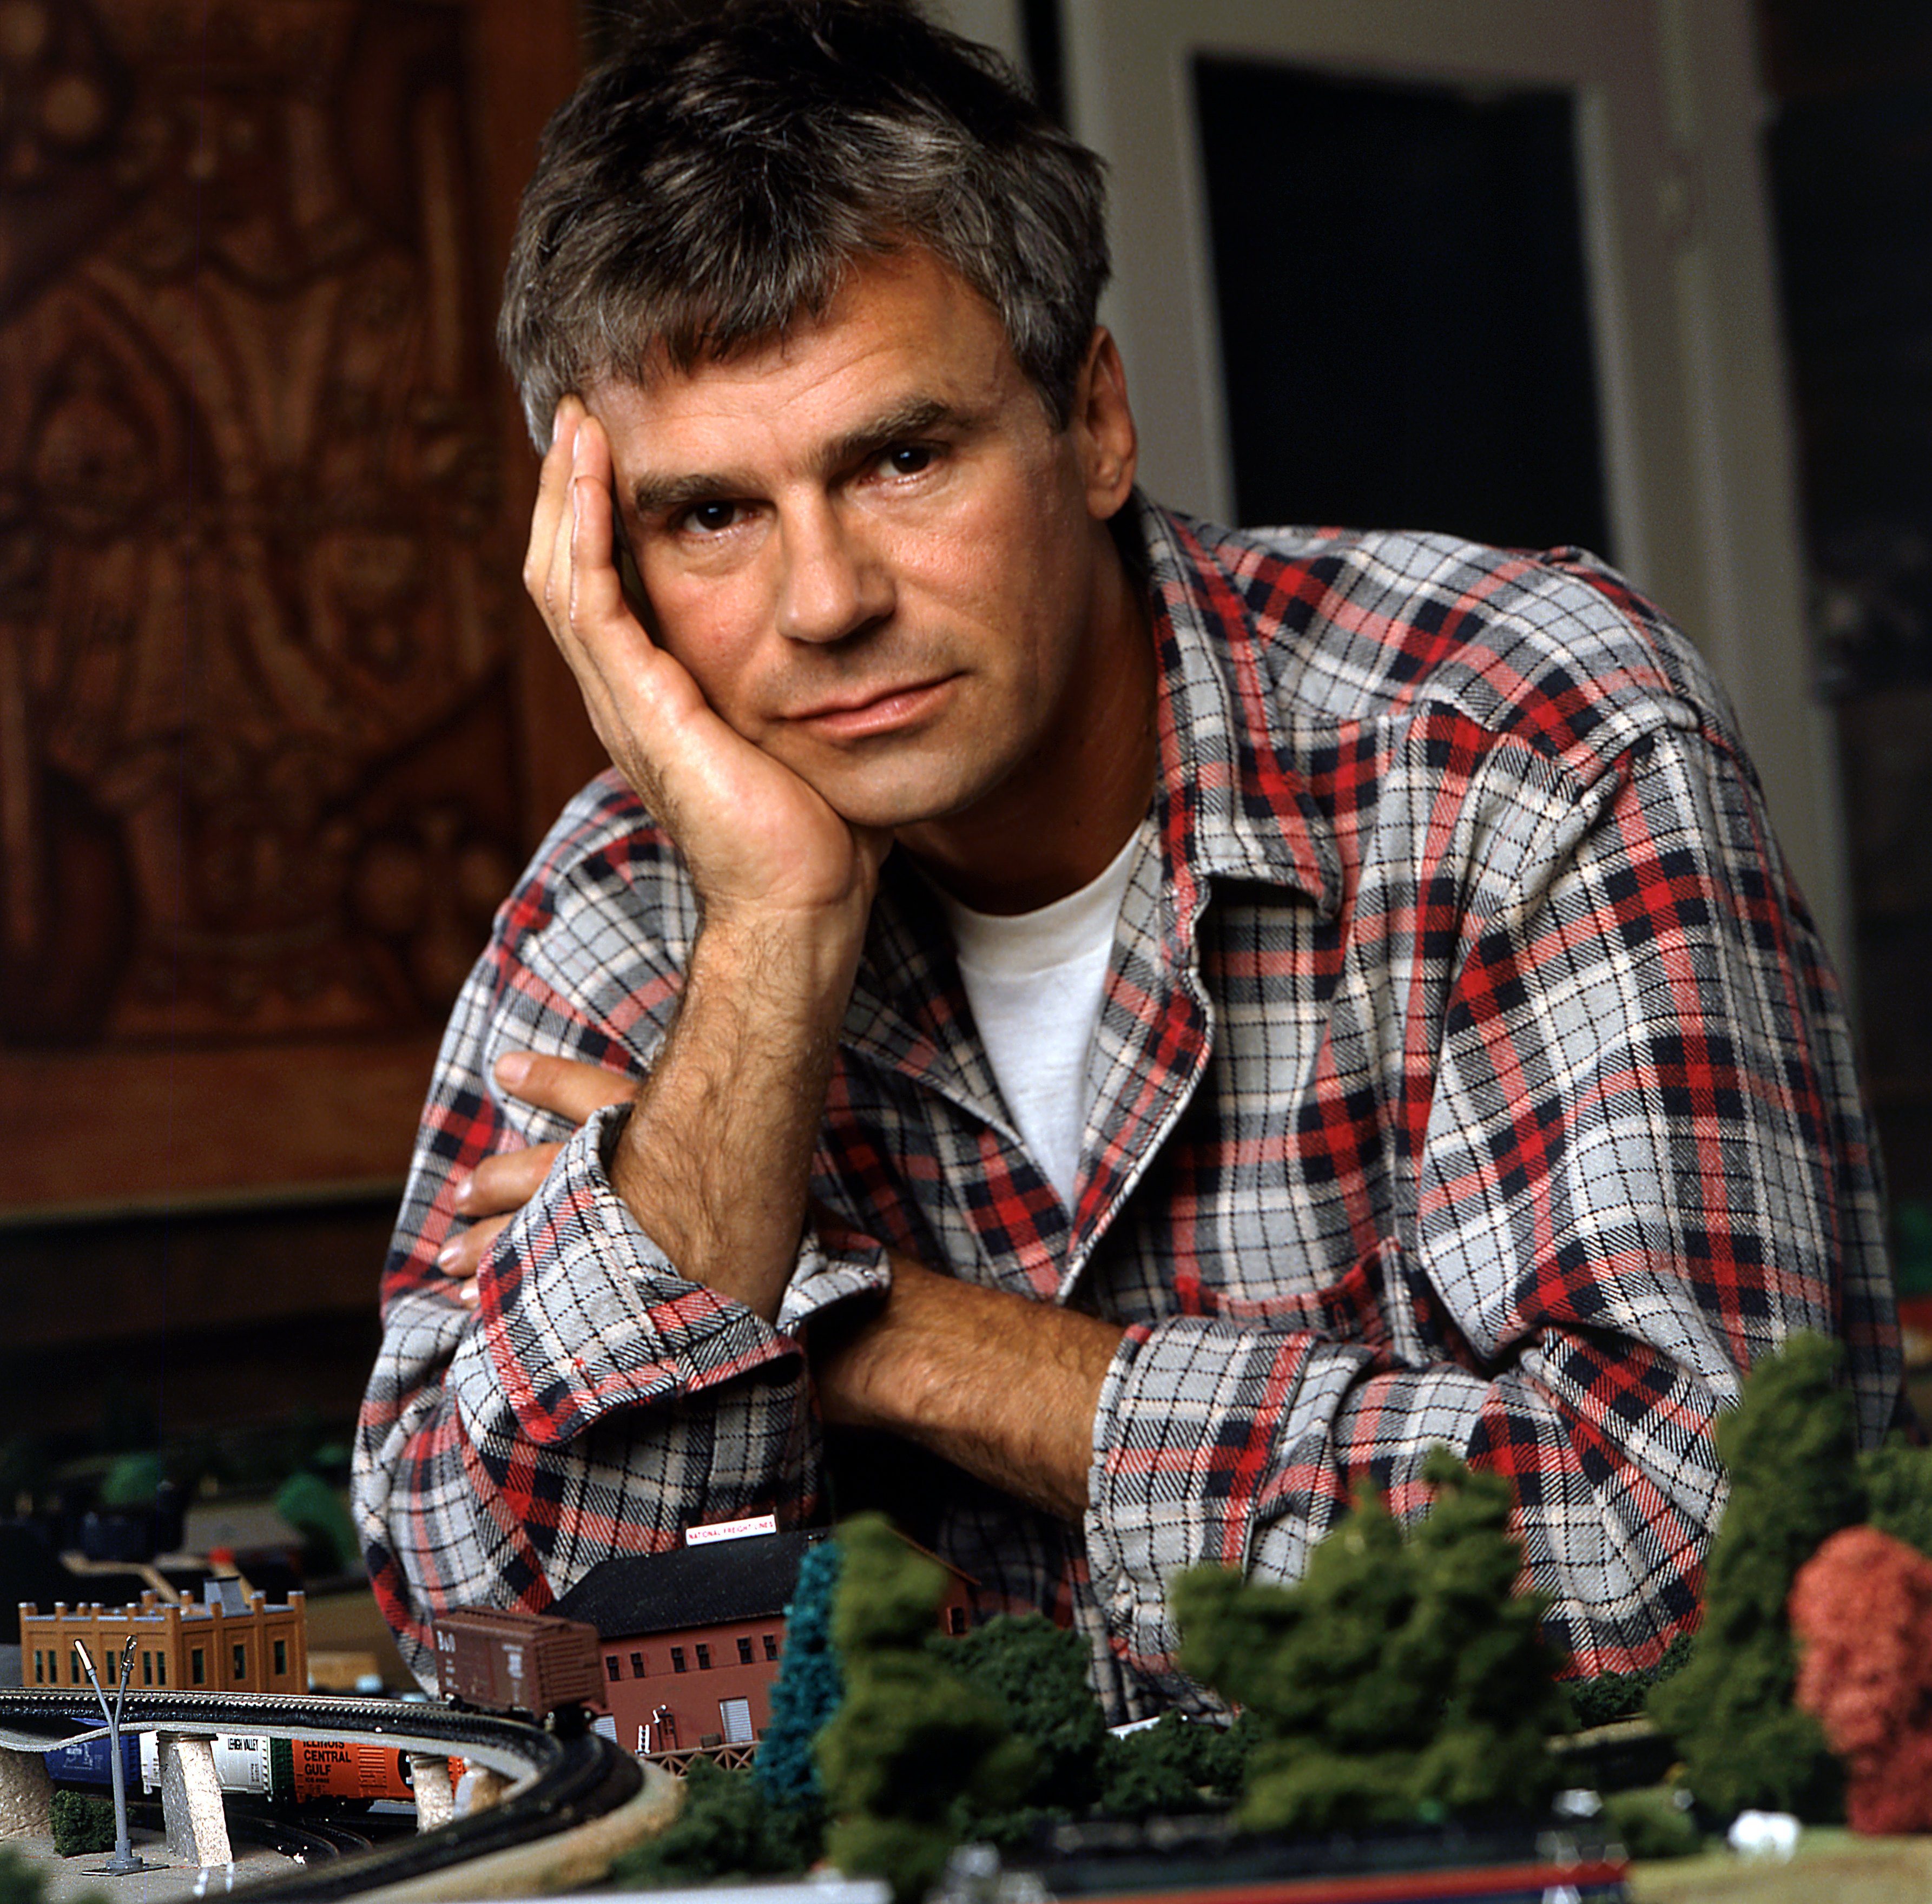 Richard Dean Anderson in a "Past The Bleachers" promotional photo in 1994 | Source: Getty Images